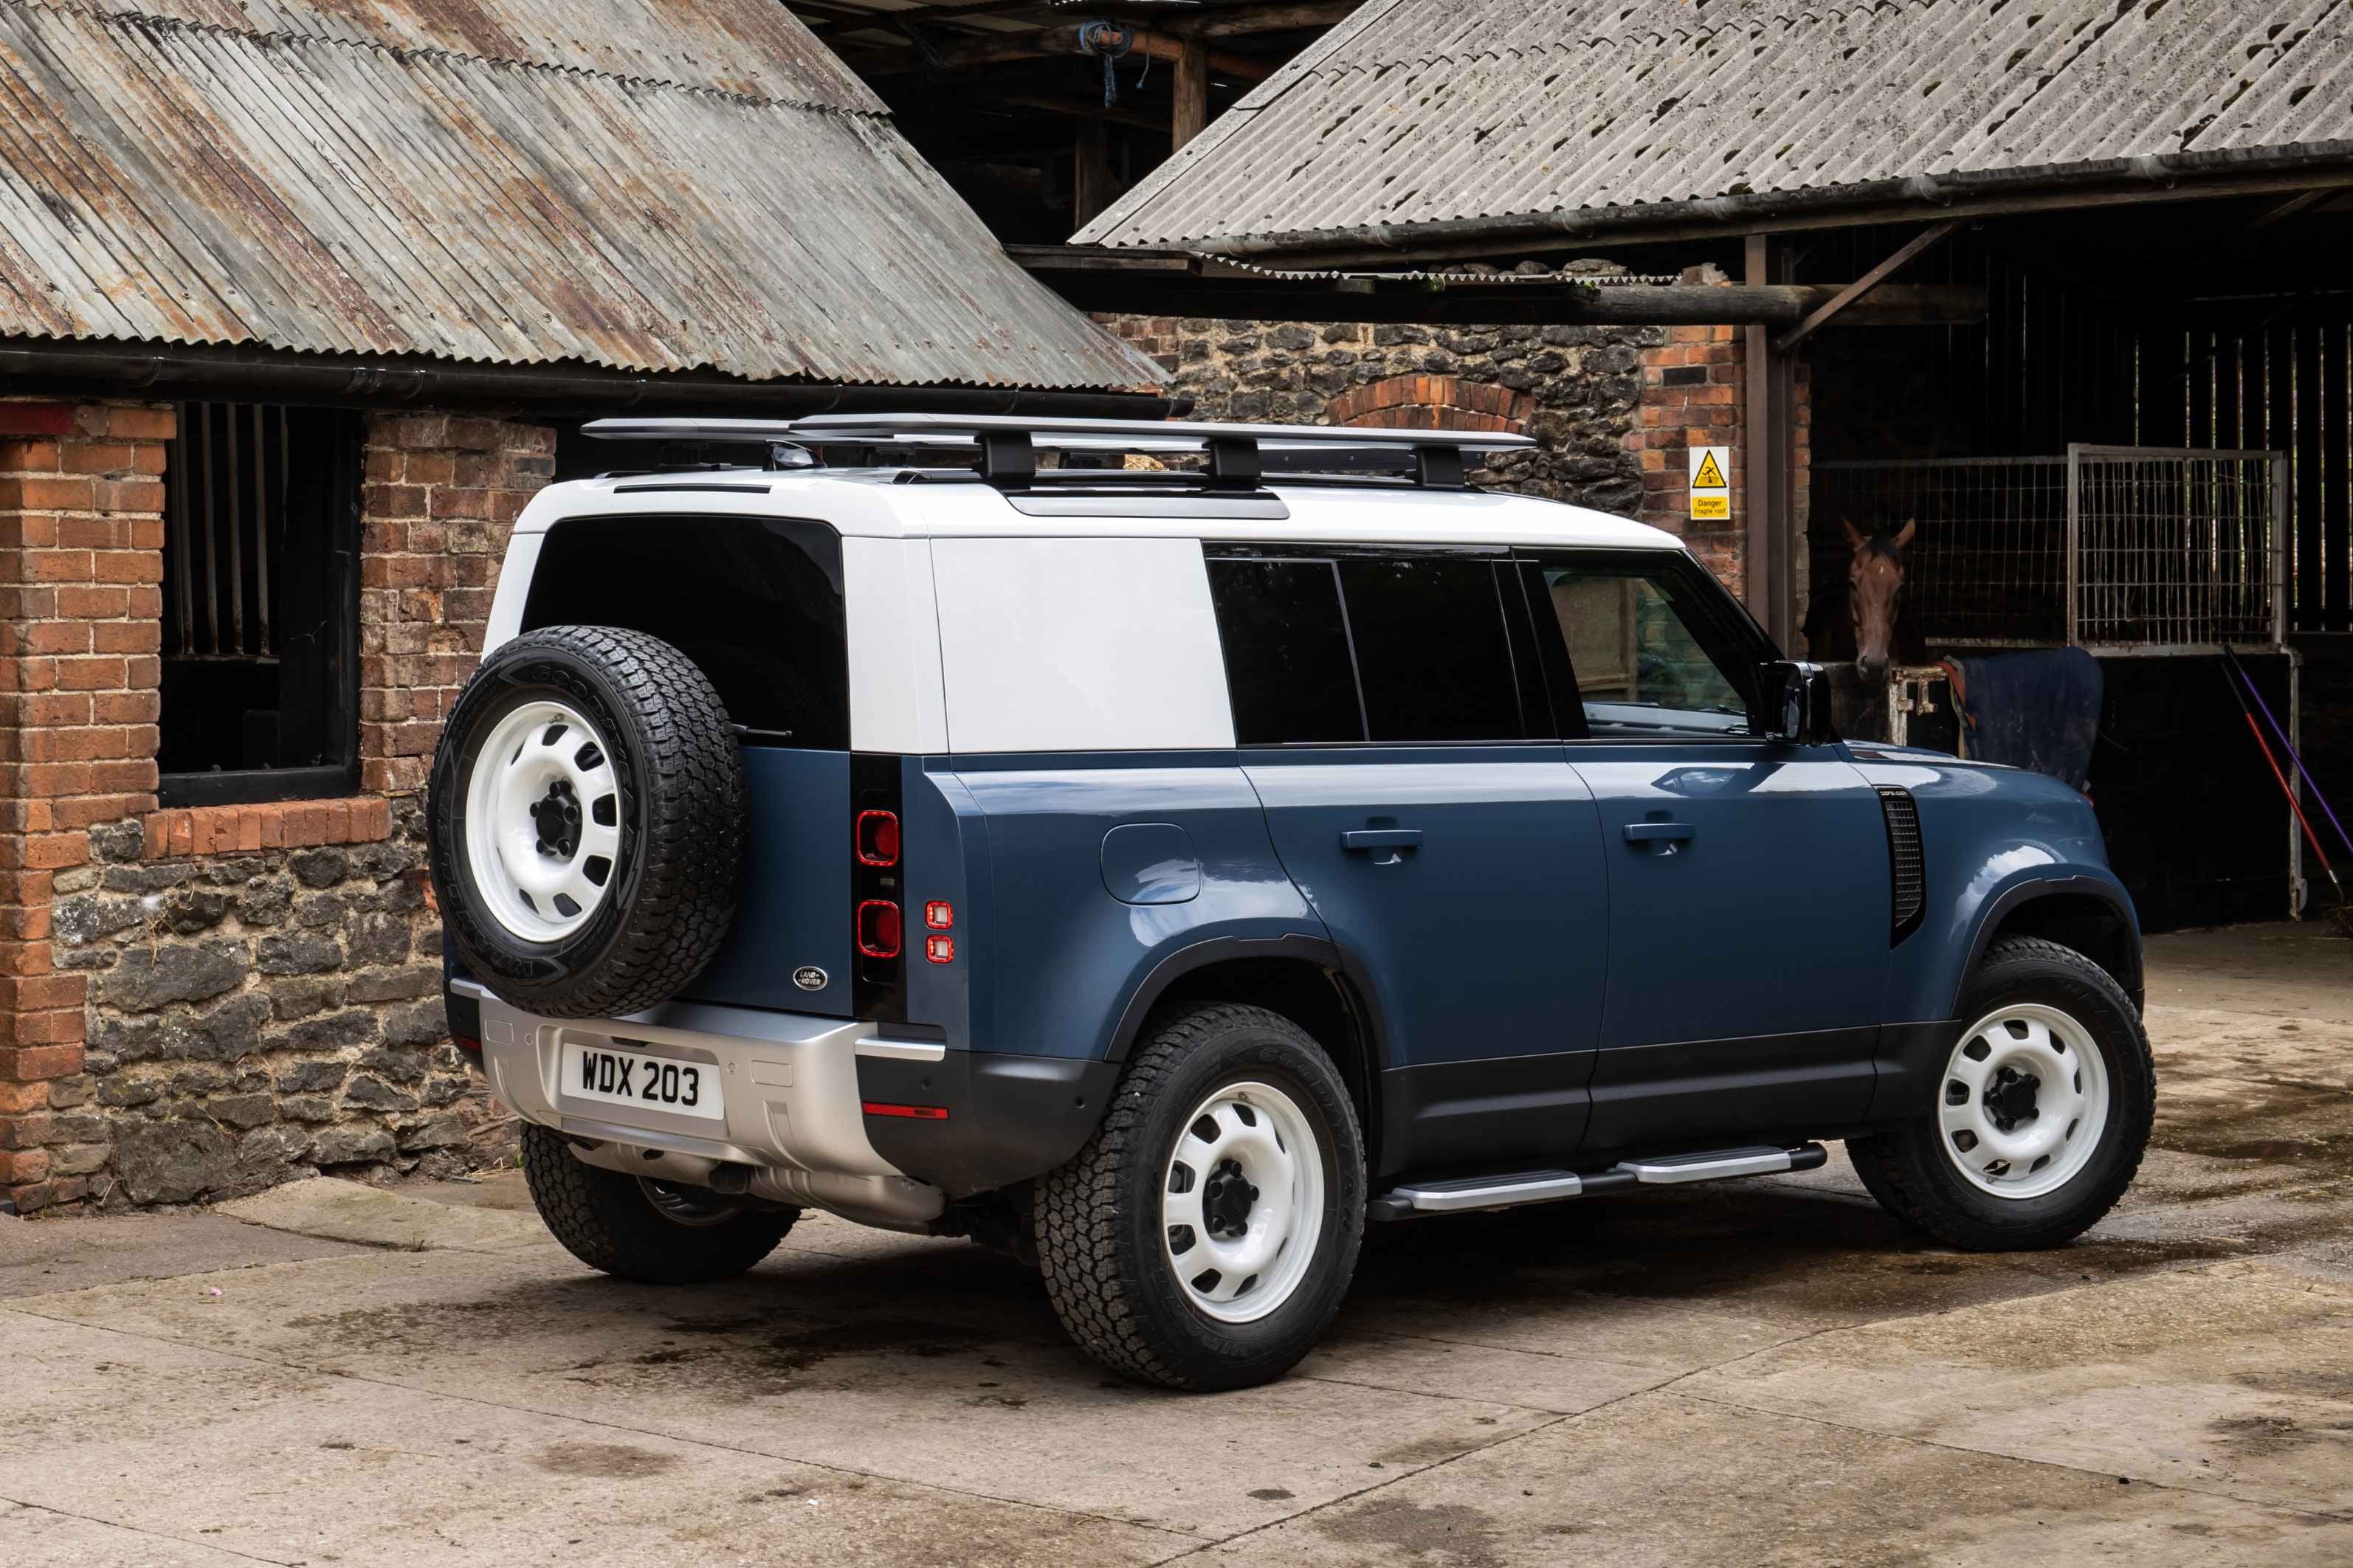 All versions of the Defender feature four-wheel drive as standard and Land Rover's Terrain Response 2 system allows the vehicle to tackle everything from sticky mud to heavy snow